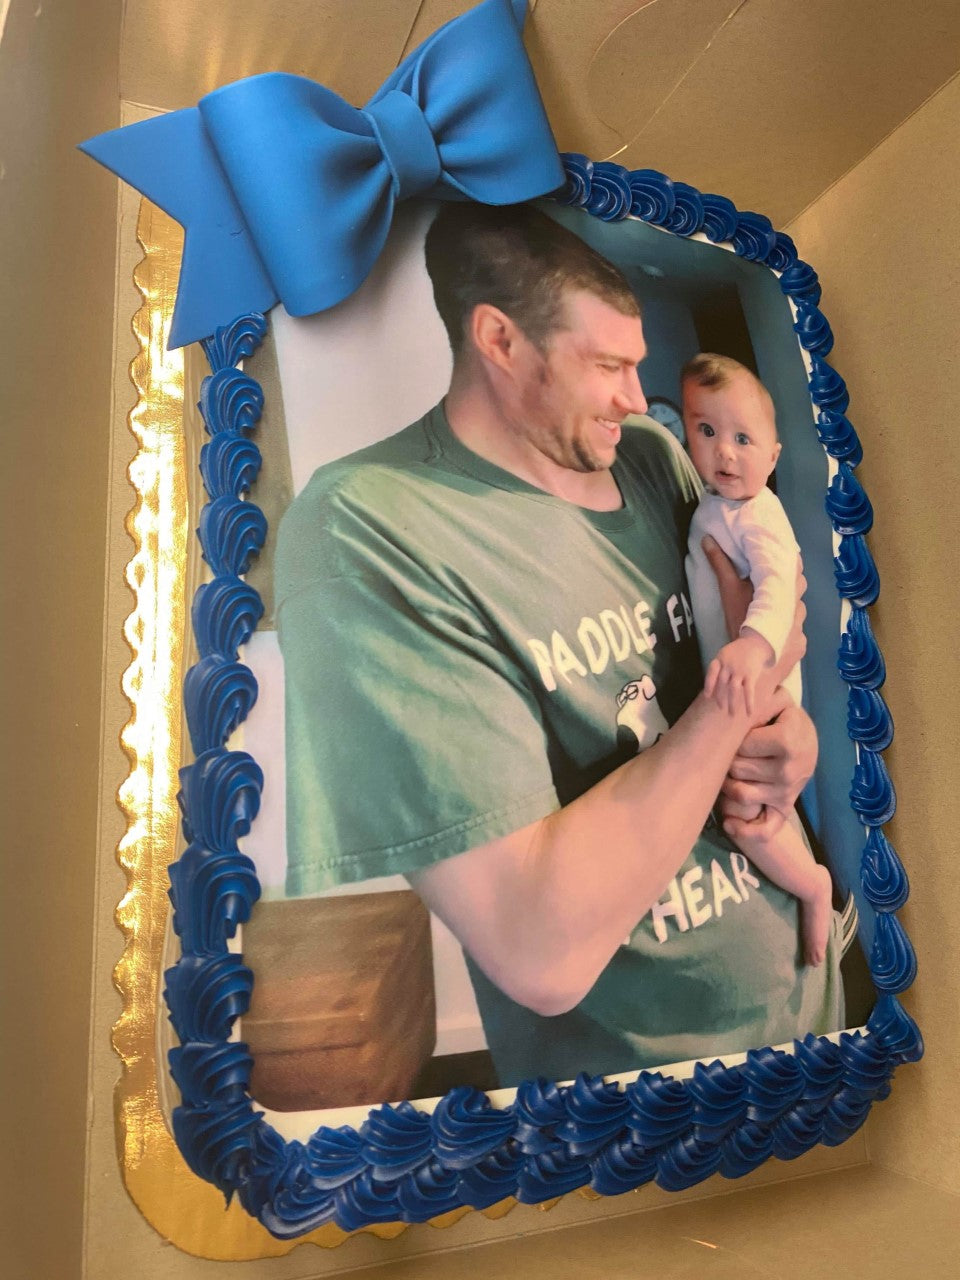 Quarter Sheet Cake - Create Your Own Photo For Your Cake By TNCT- Custom Edible Photo!